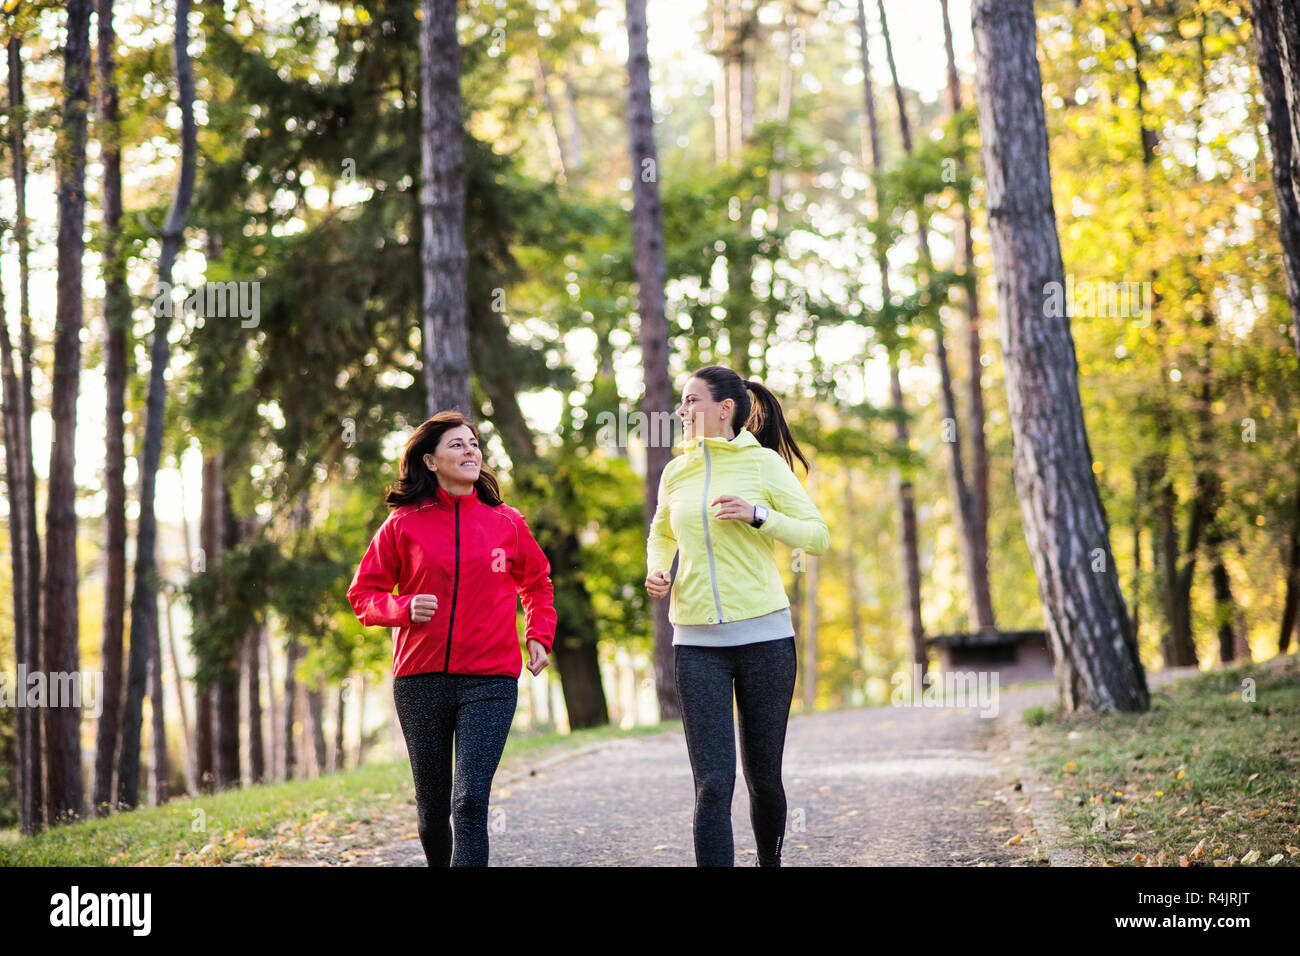 Two female runners jogging outdoors in forest in autumn nature. Stock Photo